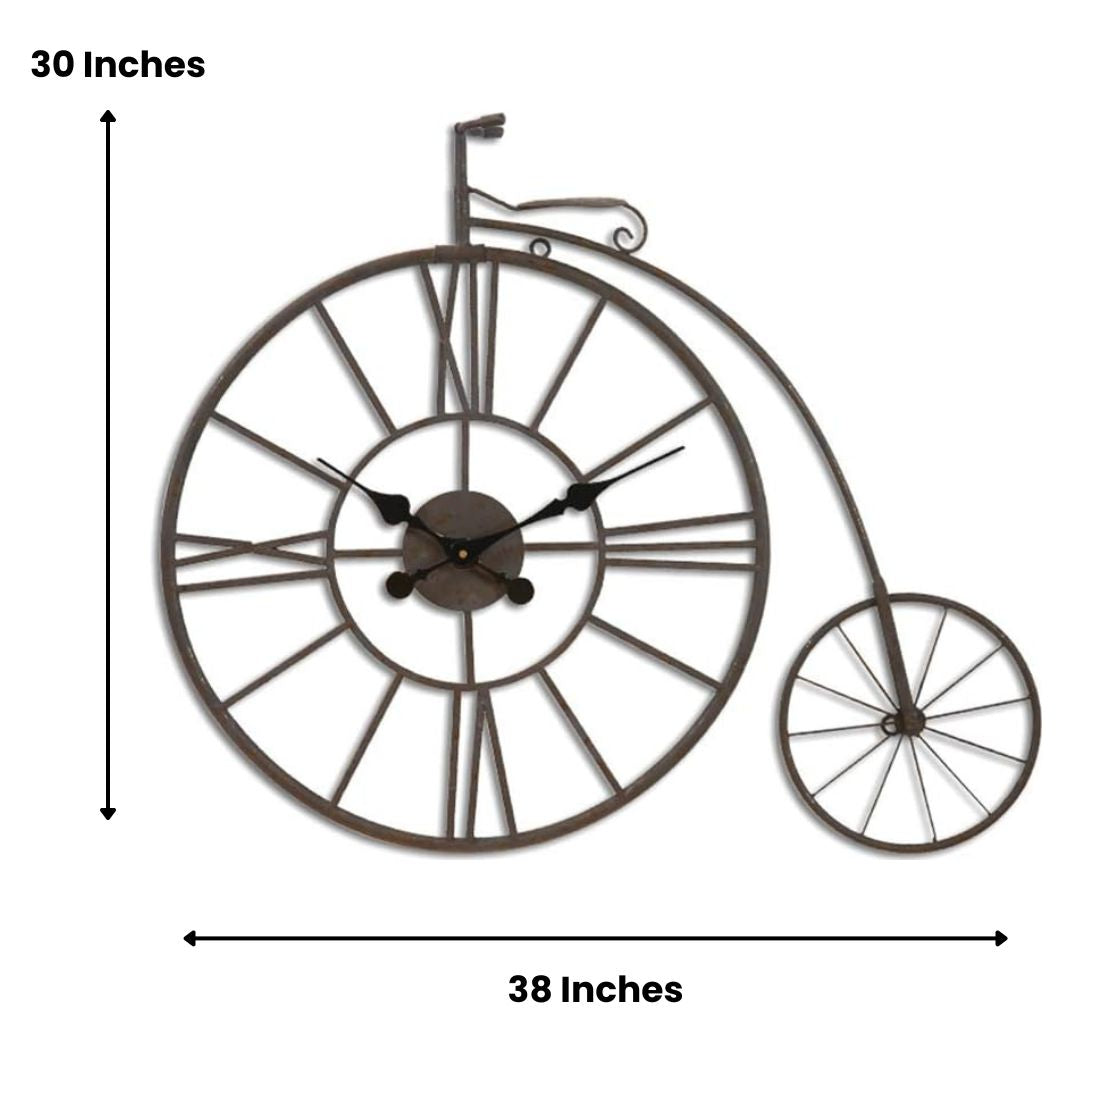 Introduce a timepiece of history with our Ancient Wheel Wall Clock. This large clock measures 38 x 30 inches and brings a vintage touch to any living room. With its unique design and accurate timekeeping, it adds a sophisticated element to your home decor.